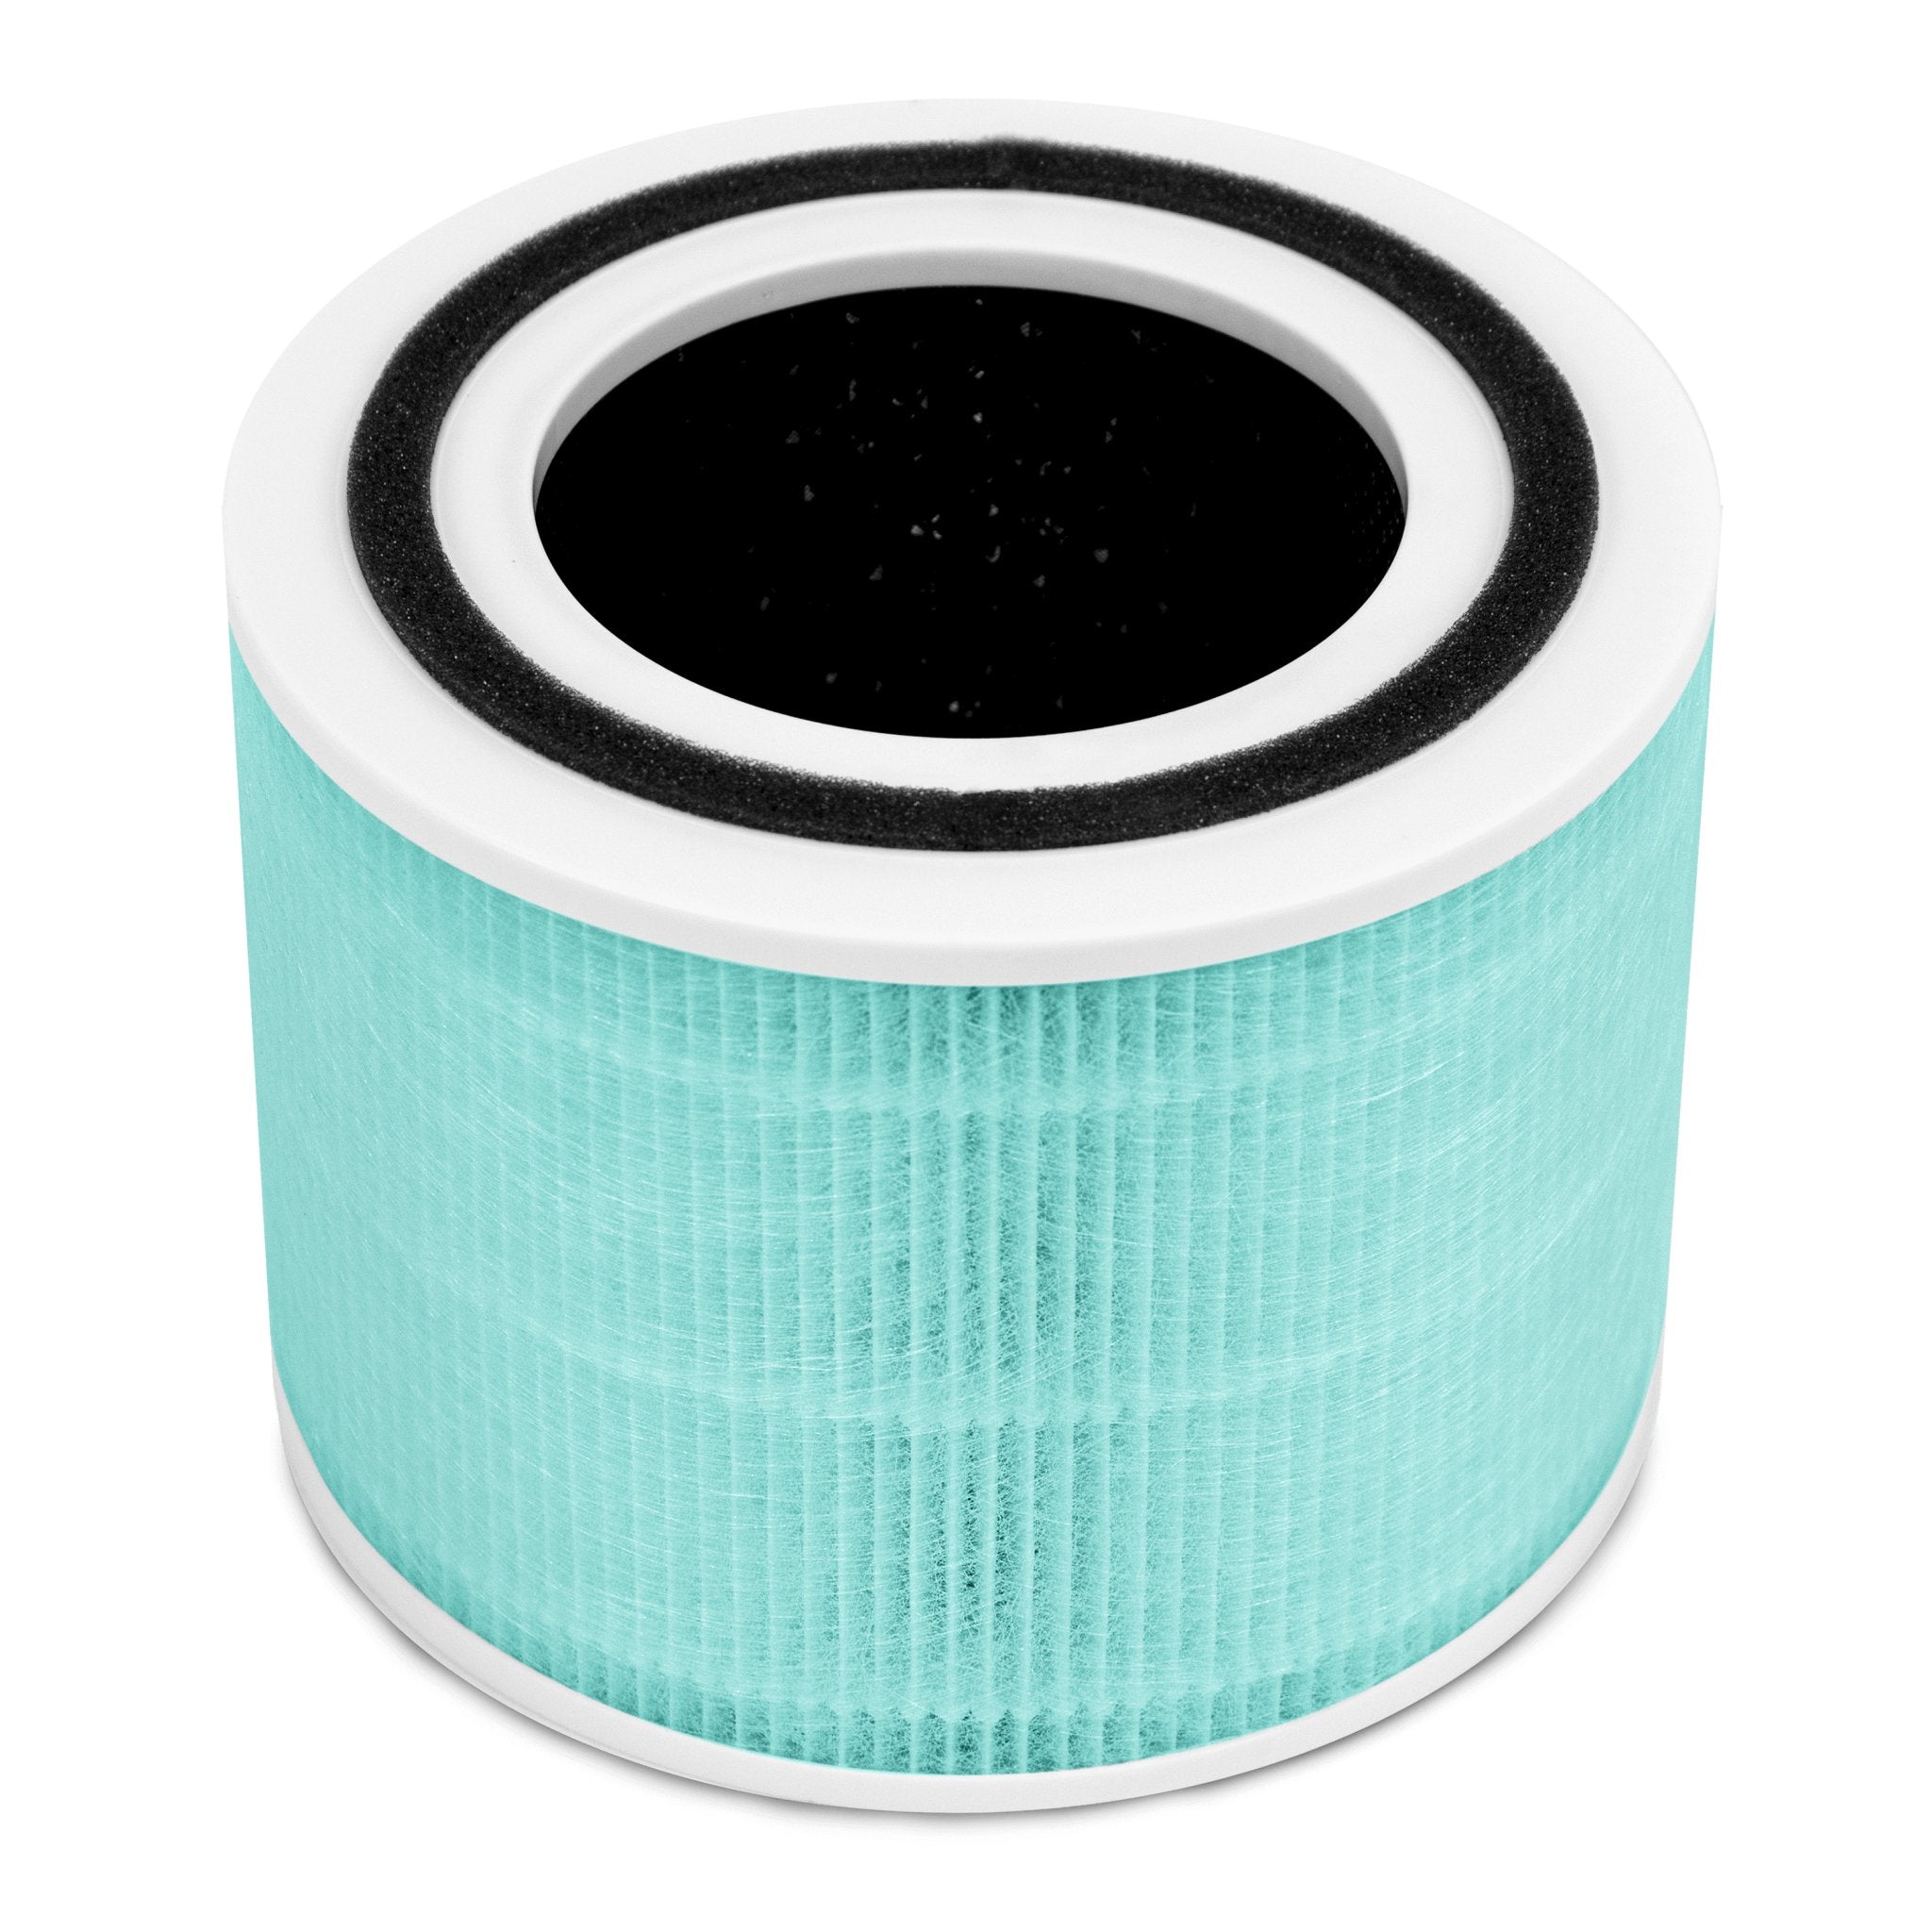 Core 300 Filter for LEVOIT Core 300 and Core 300S Air Purifier, 2 Pack  3-In-1 H1